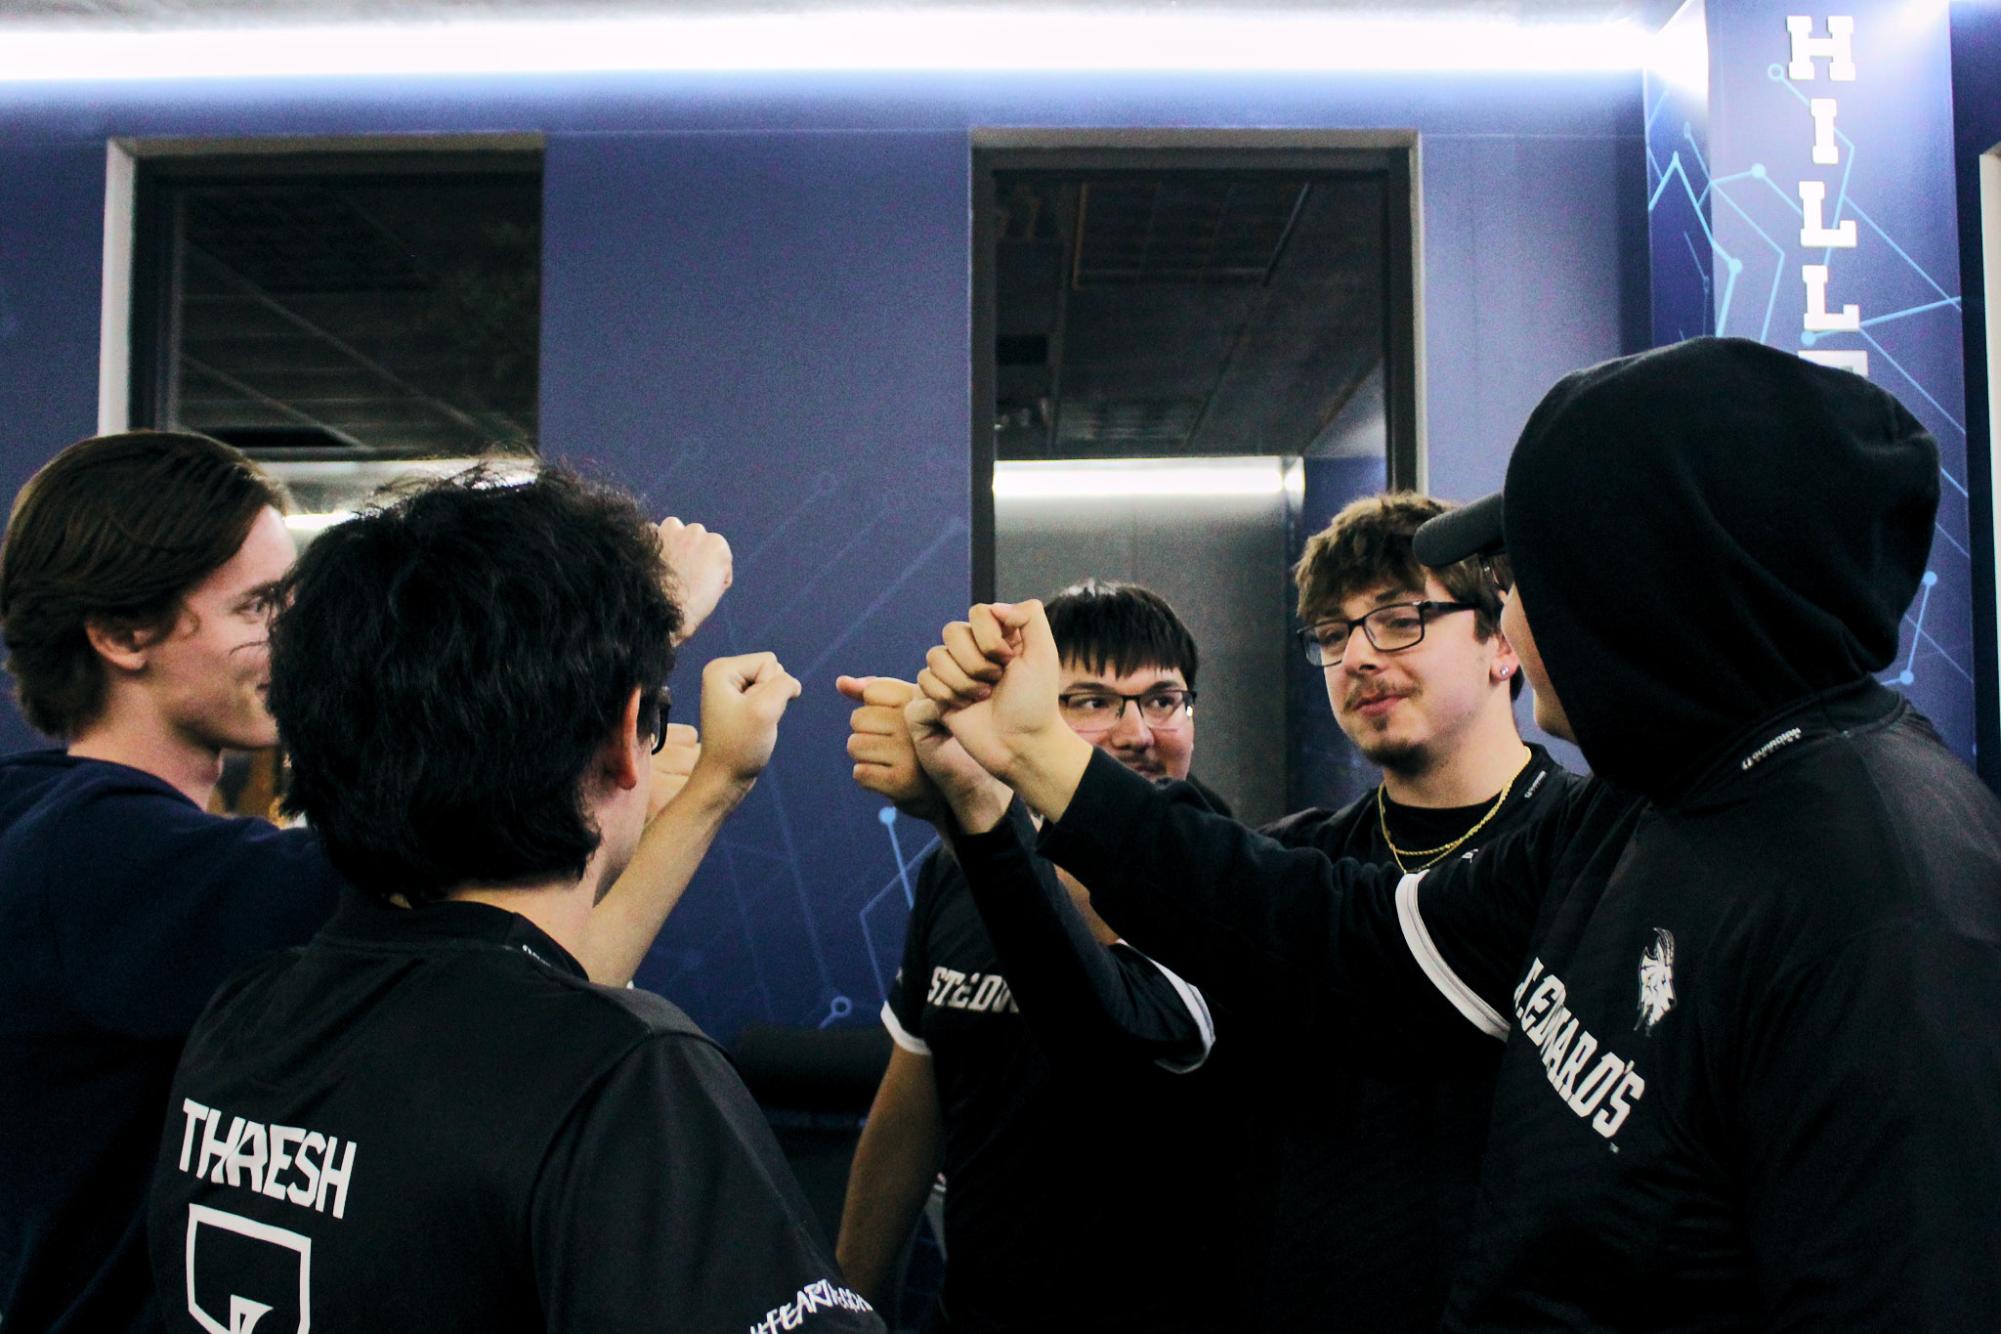 The Esports Call of Duty teams huddles together with their fists in the center, showing support for one another.